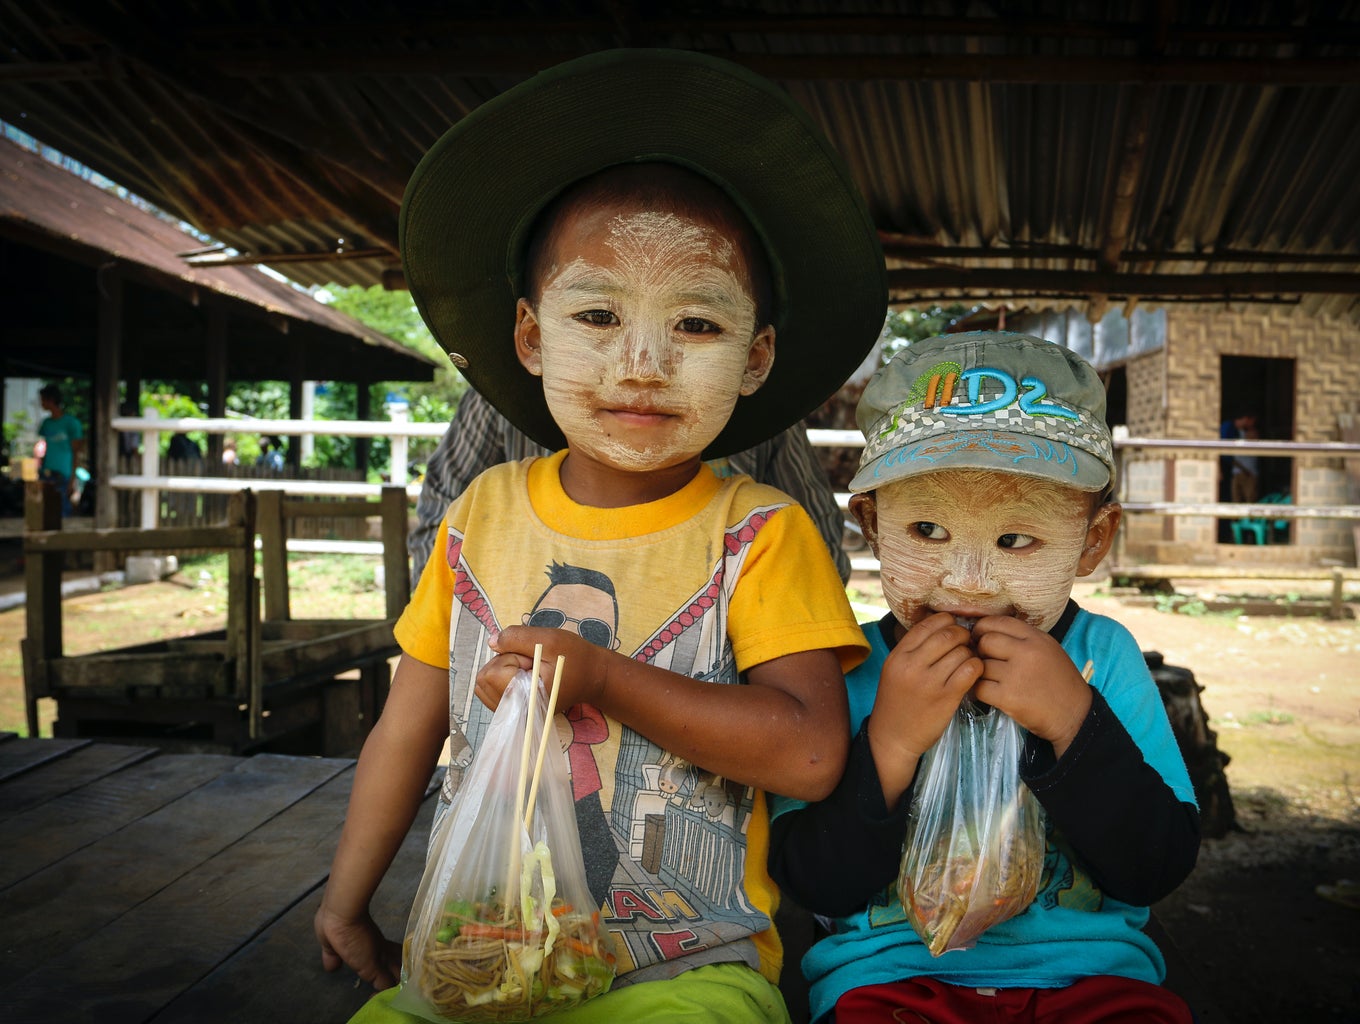 kids with thanakha (sun protection), smiling, on the way to Hsipaw, Mynmar